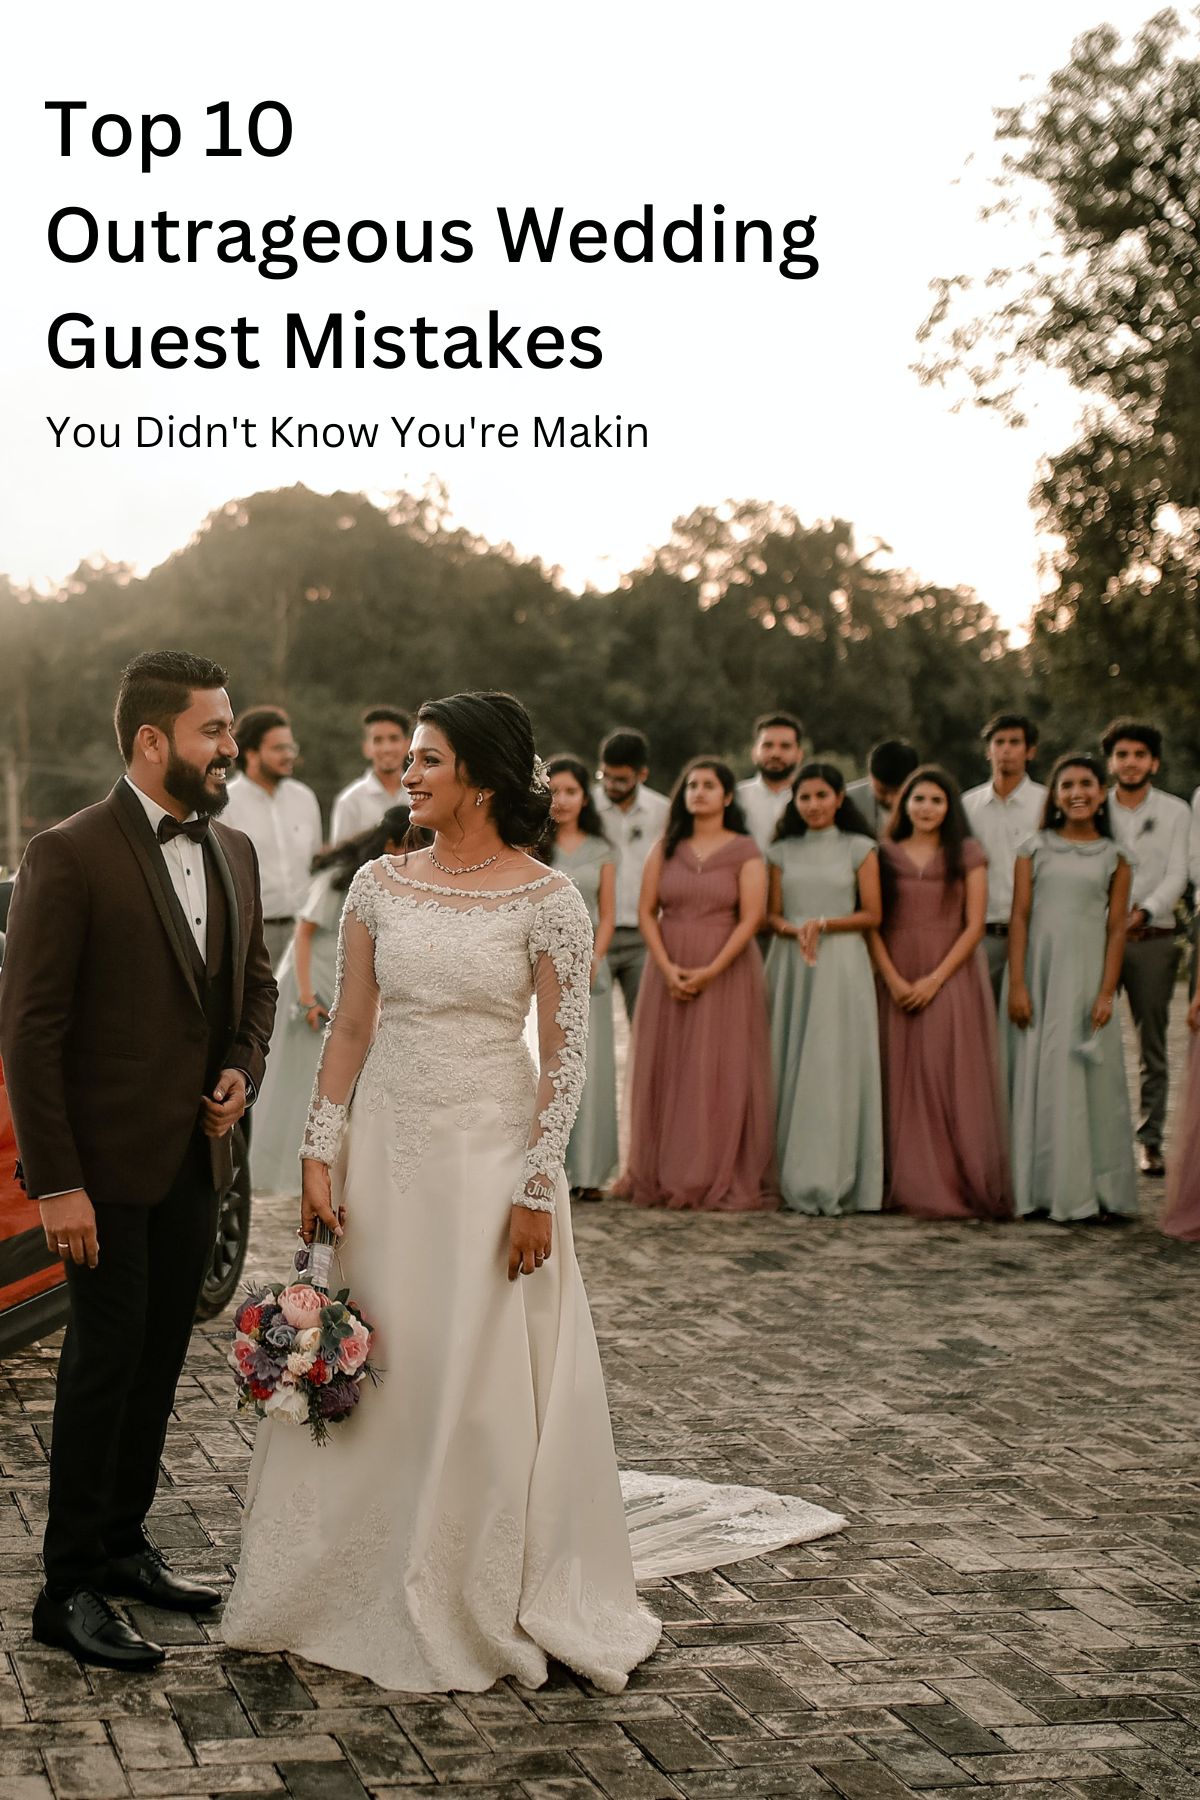 Top 10 Outrageous Wedding Guest Mistakes Pin